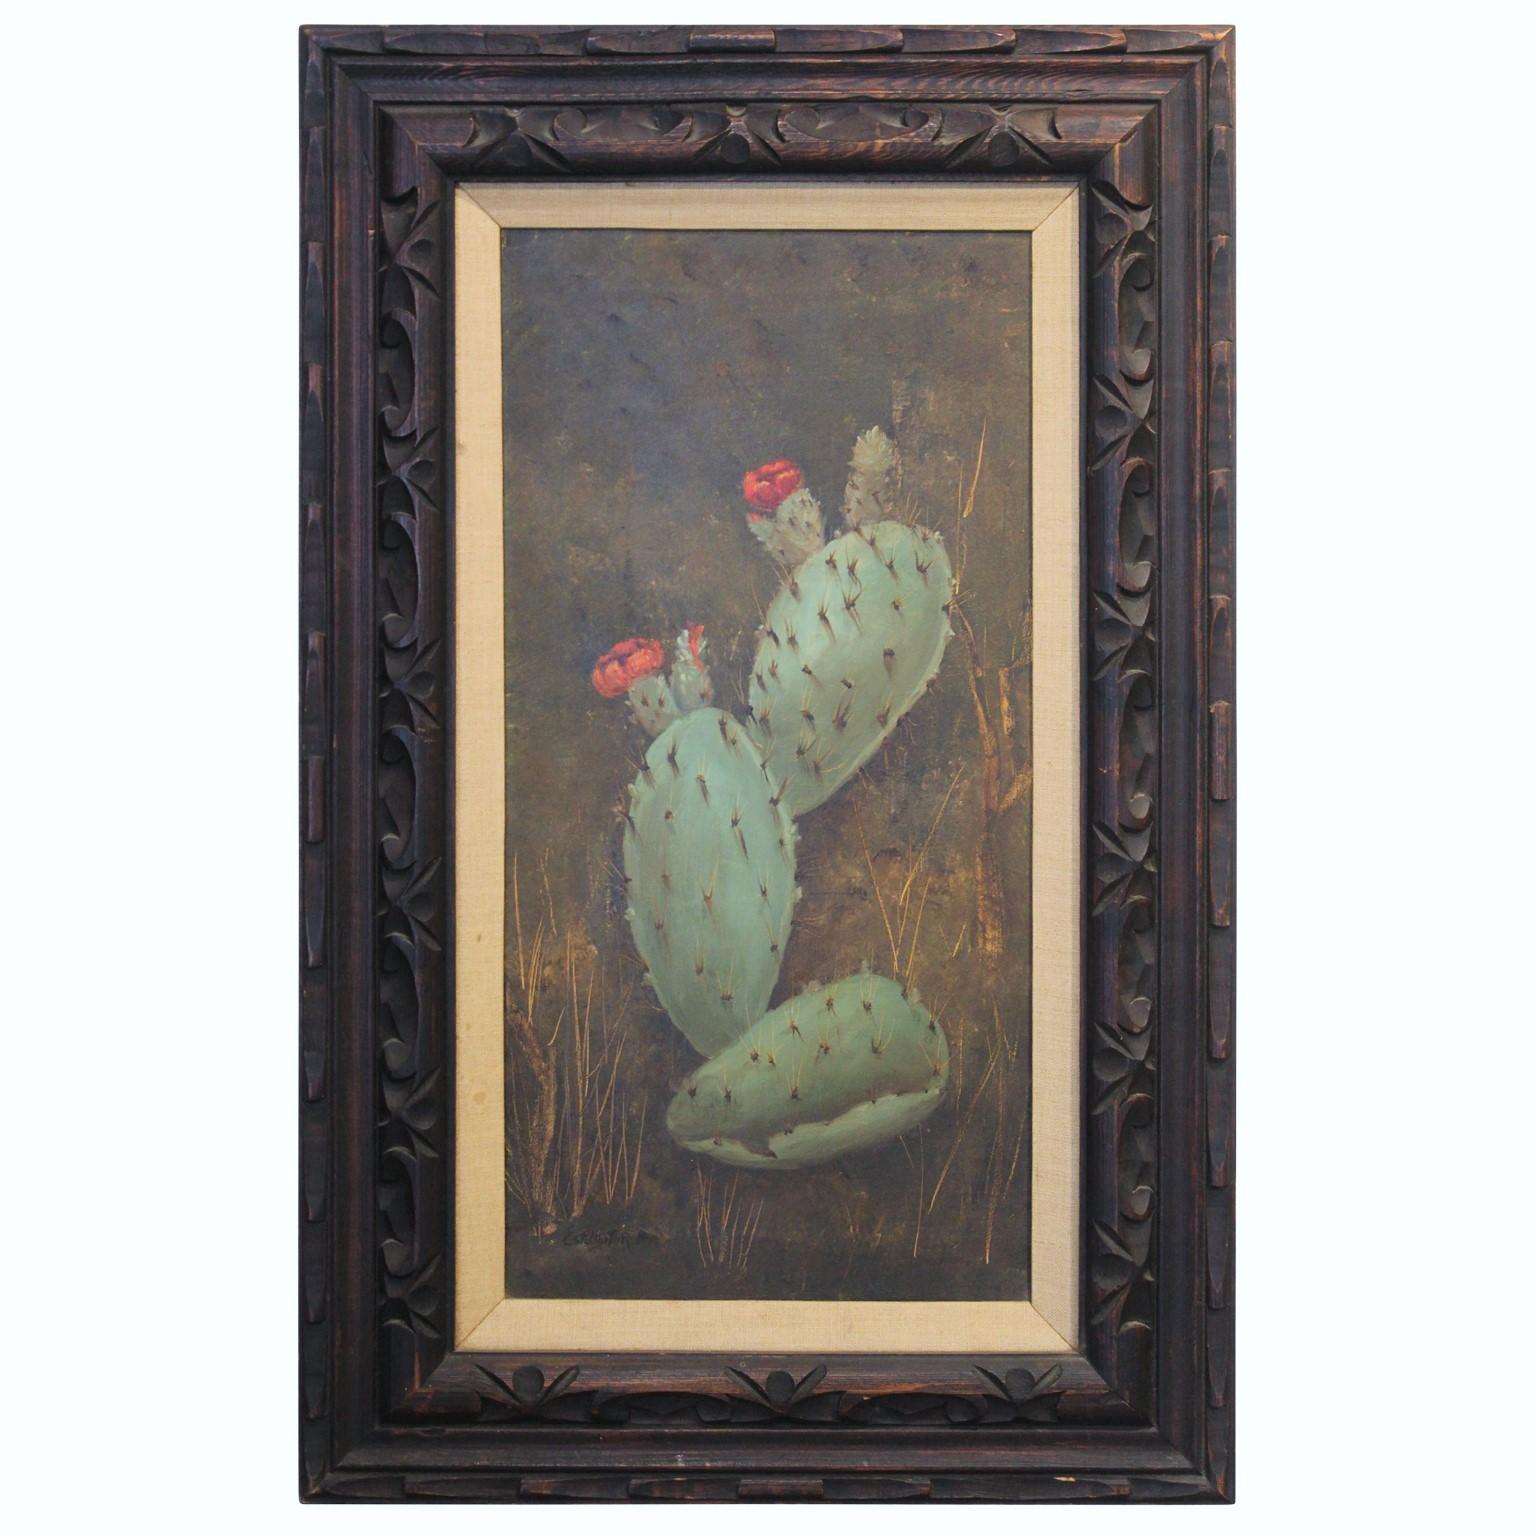 Estelle Stair Landscape Painting - Naturalistic Painting of a Flowering Cactus